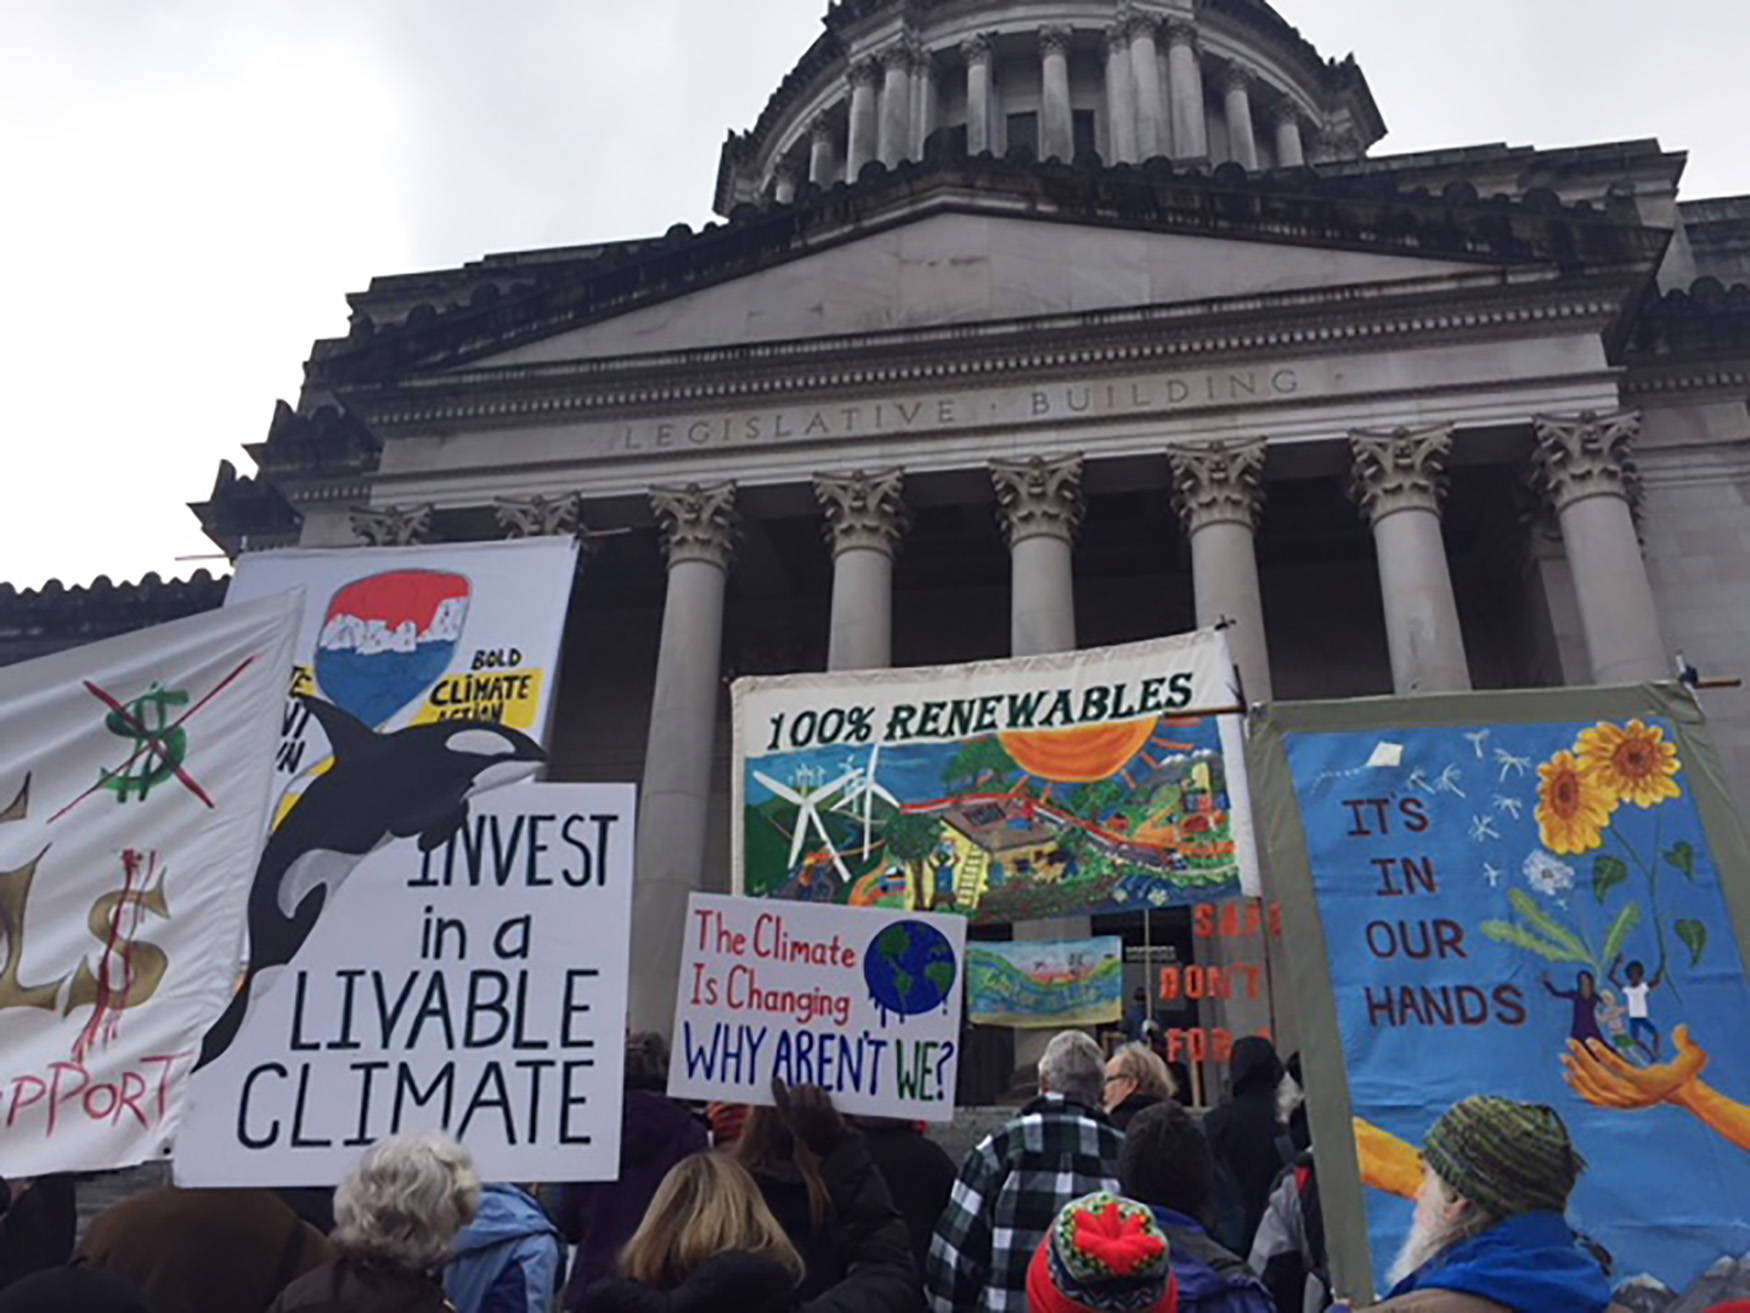 Climate groups gather on the steps of the Capitol building on Monday, demanding the government uphold treaty rights, habitat and the environment. COURTESY PHOTO, WNPA Olympia News Bureau